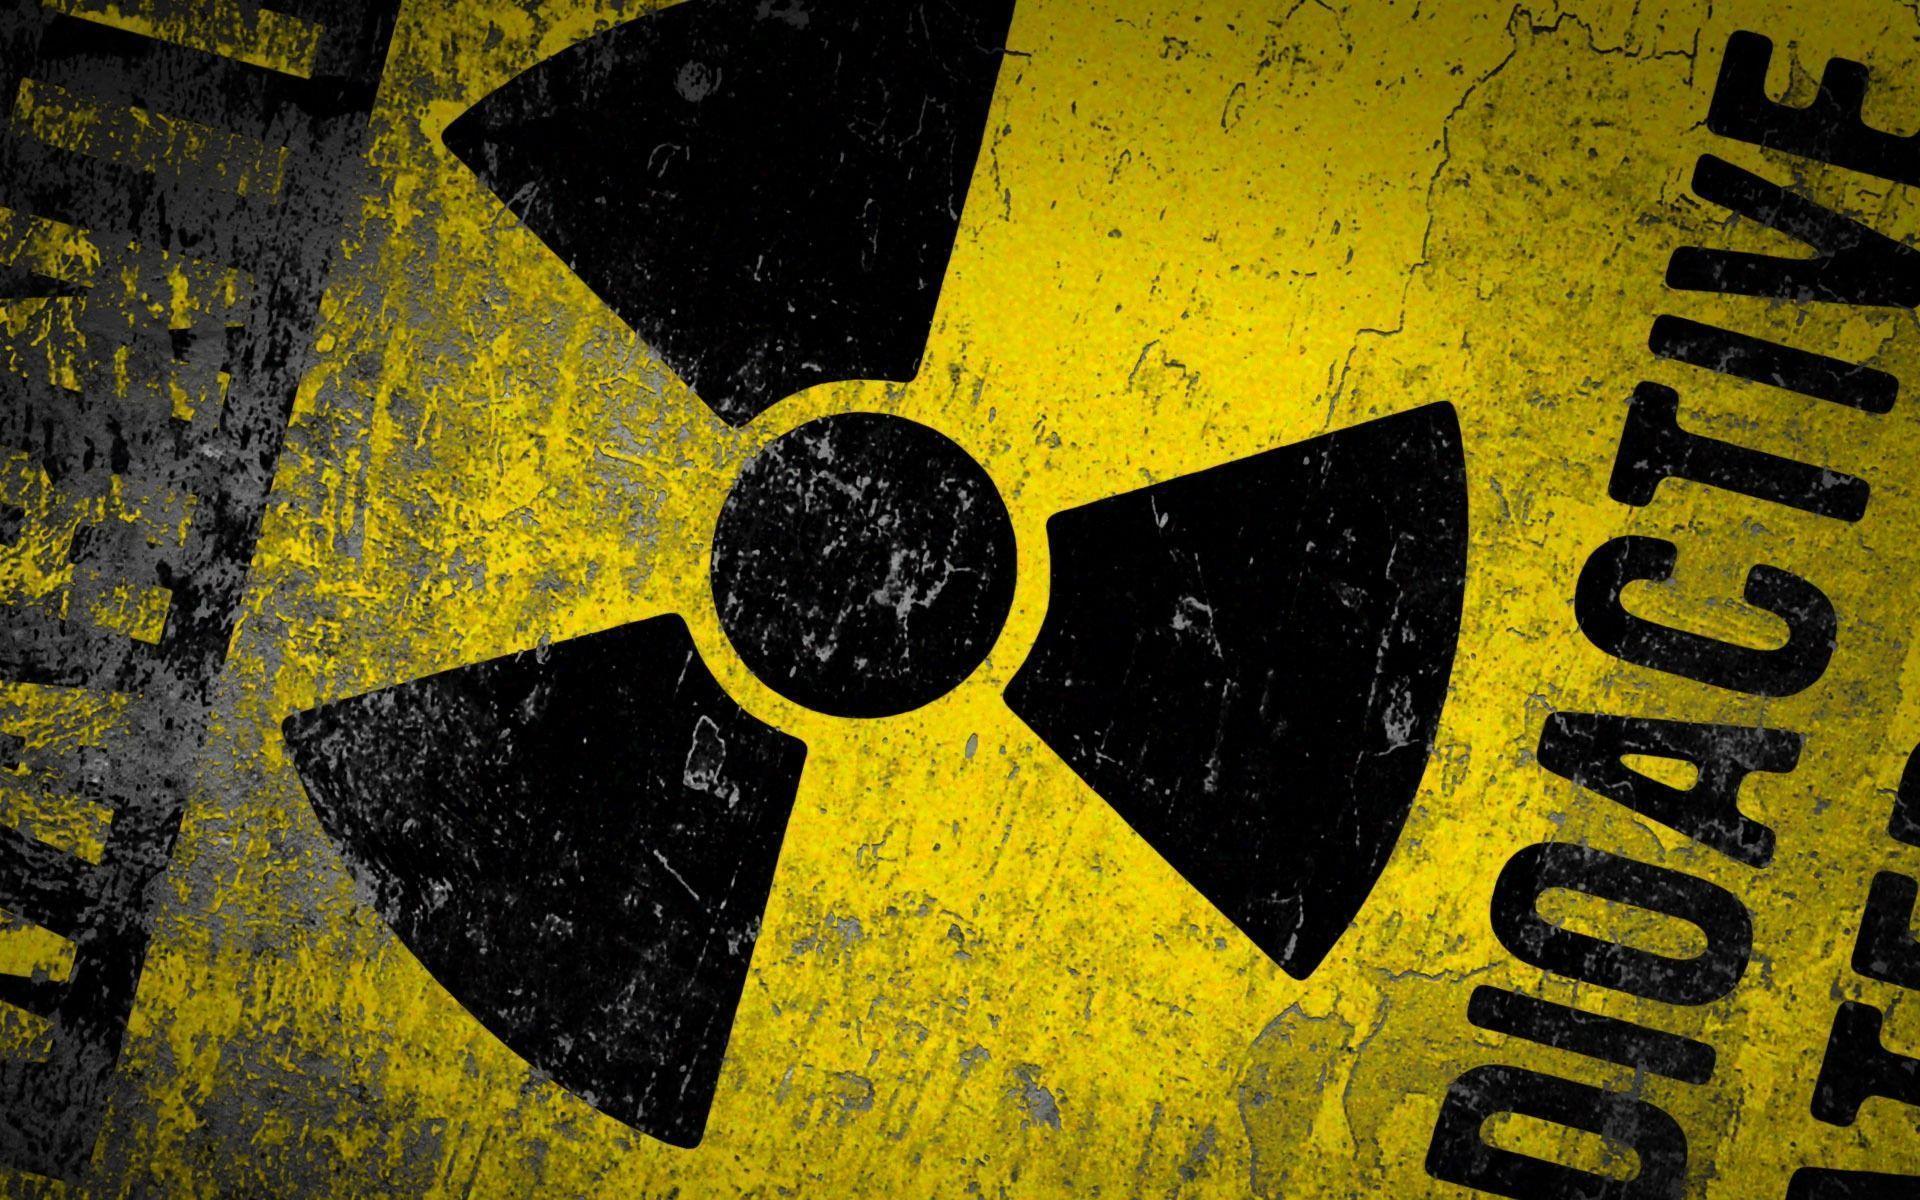 Radioactive Wallpaper Miscellaneous Other Wallpaper in jpg format